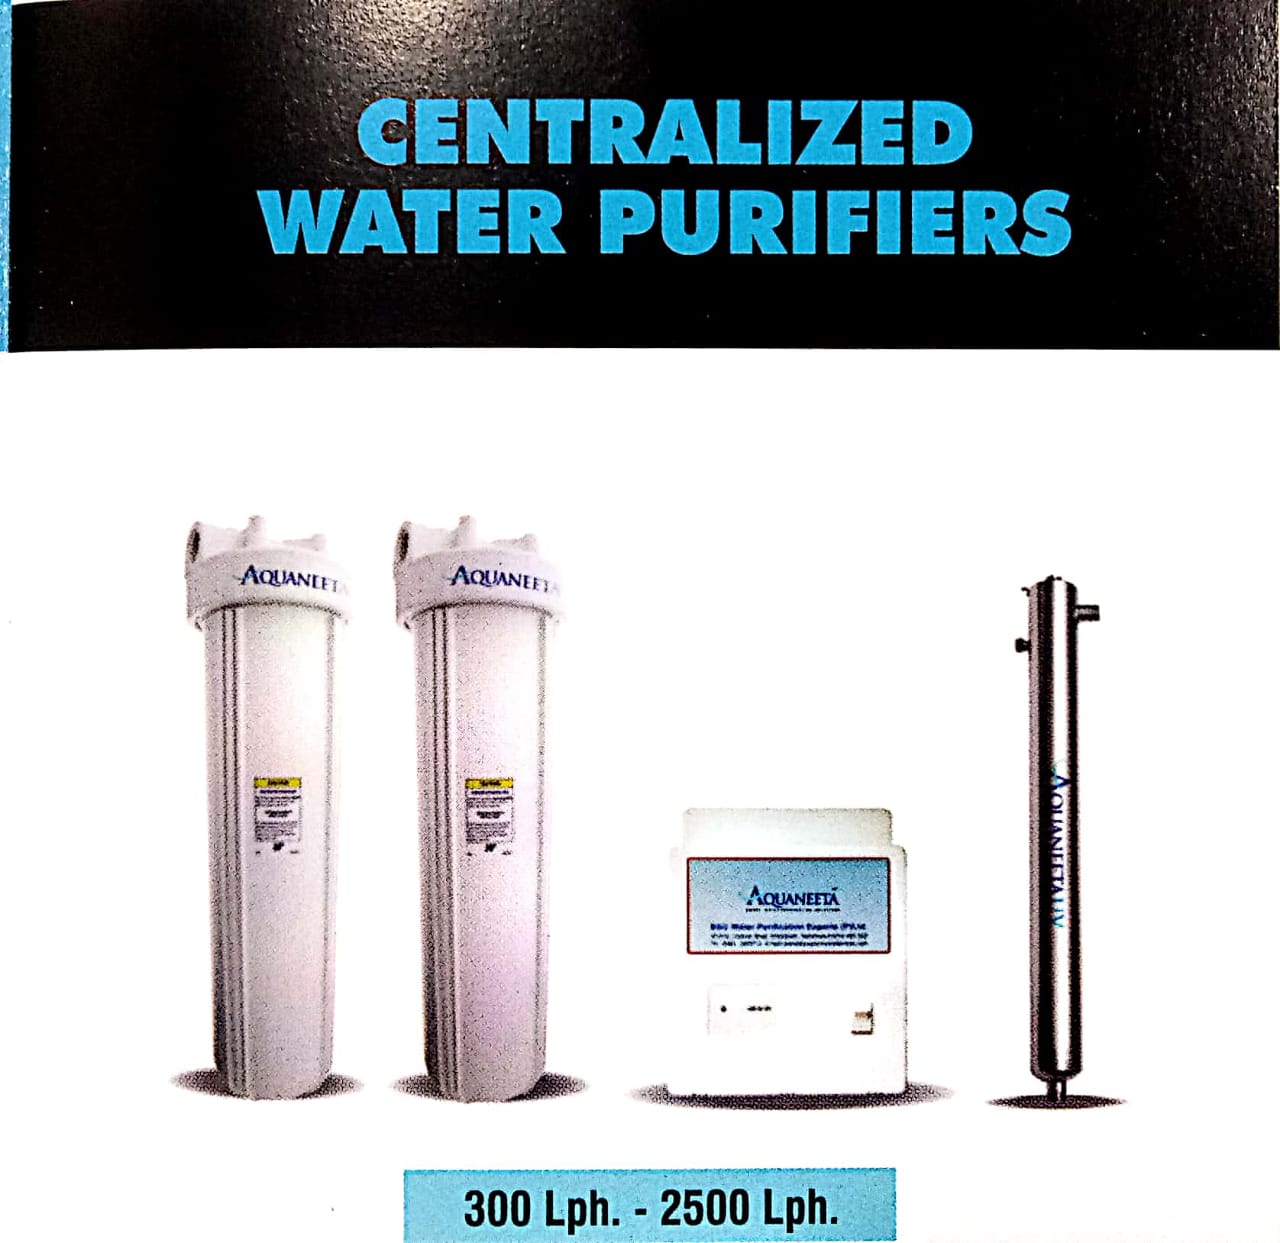 Centralized water purifiers